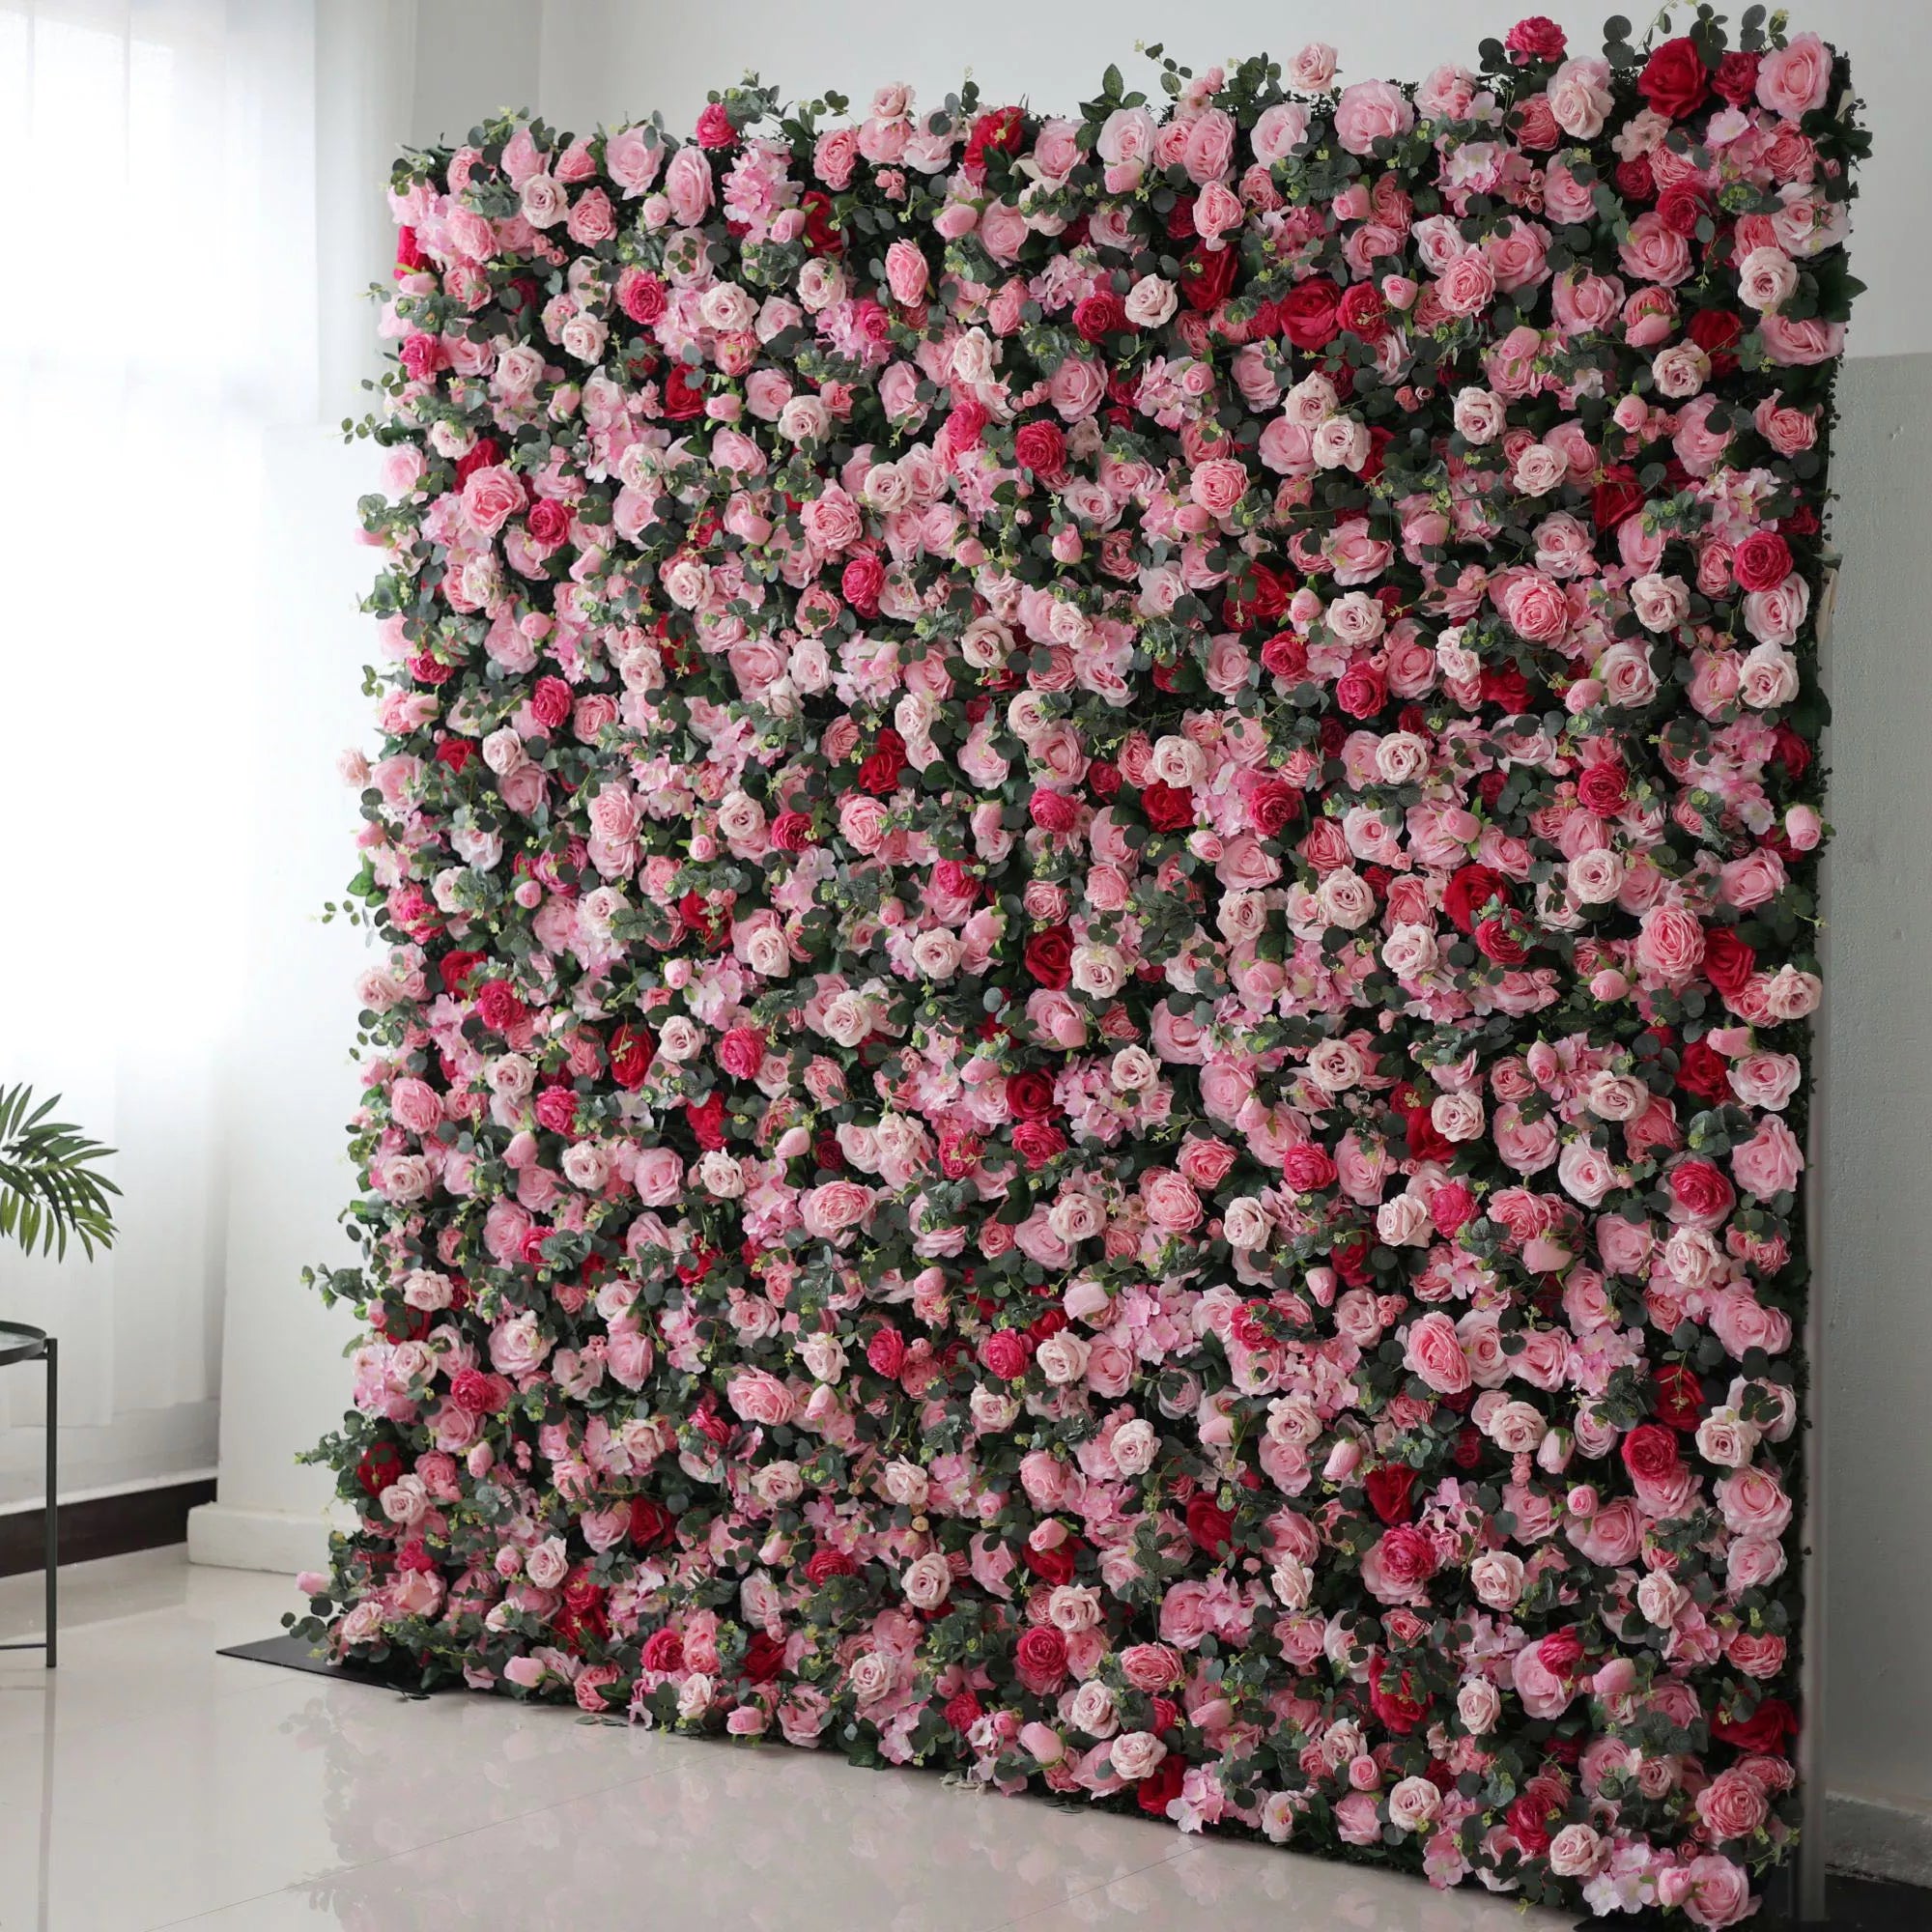 Valar Flowers' Artificial Fabric Flower Wall: Blooming Bliss. A stunning medley of pink, red, and white roses, beautifully set, creating an atmosphere of romance and botanical grandeur.